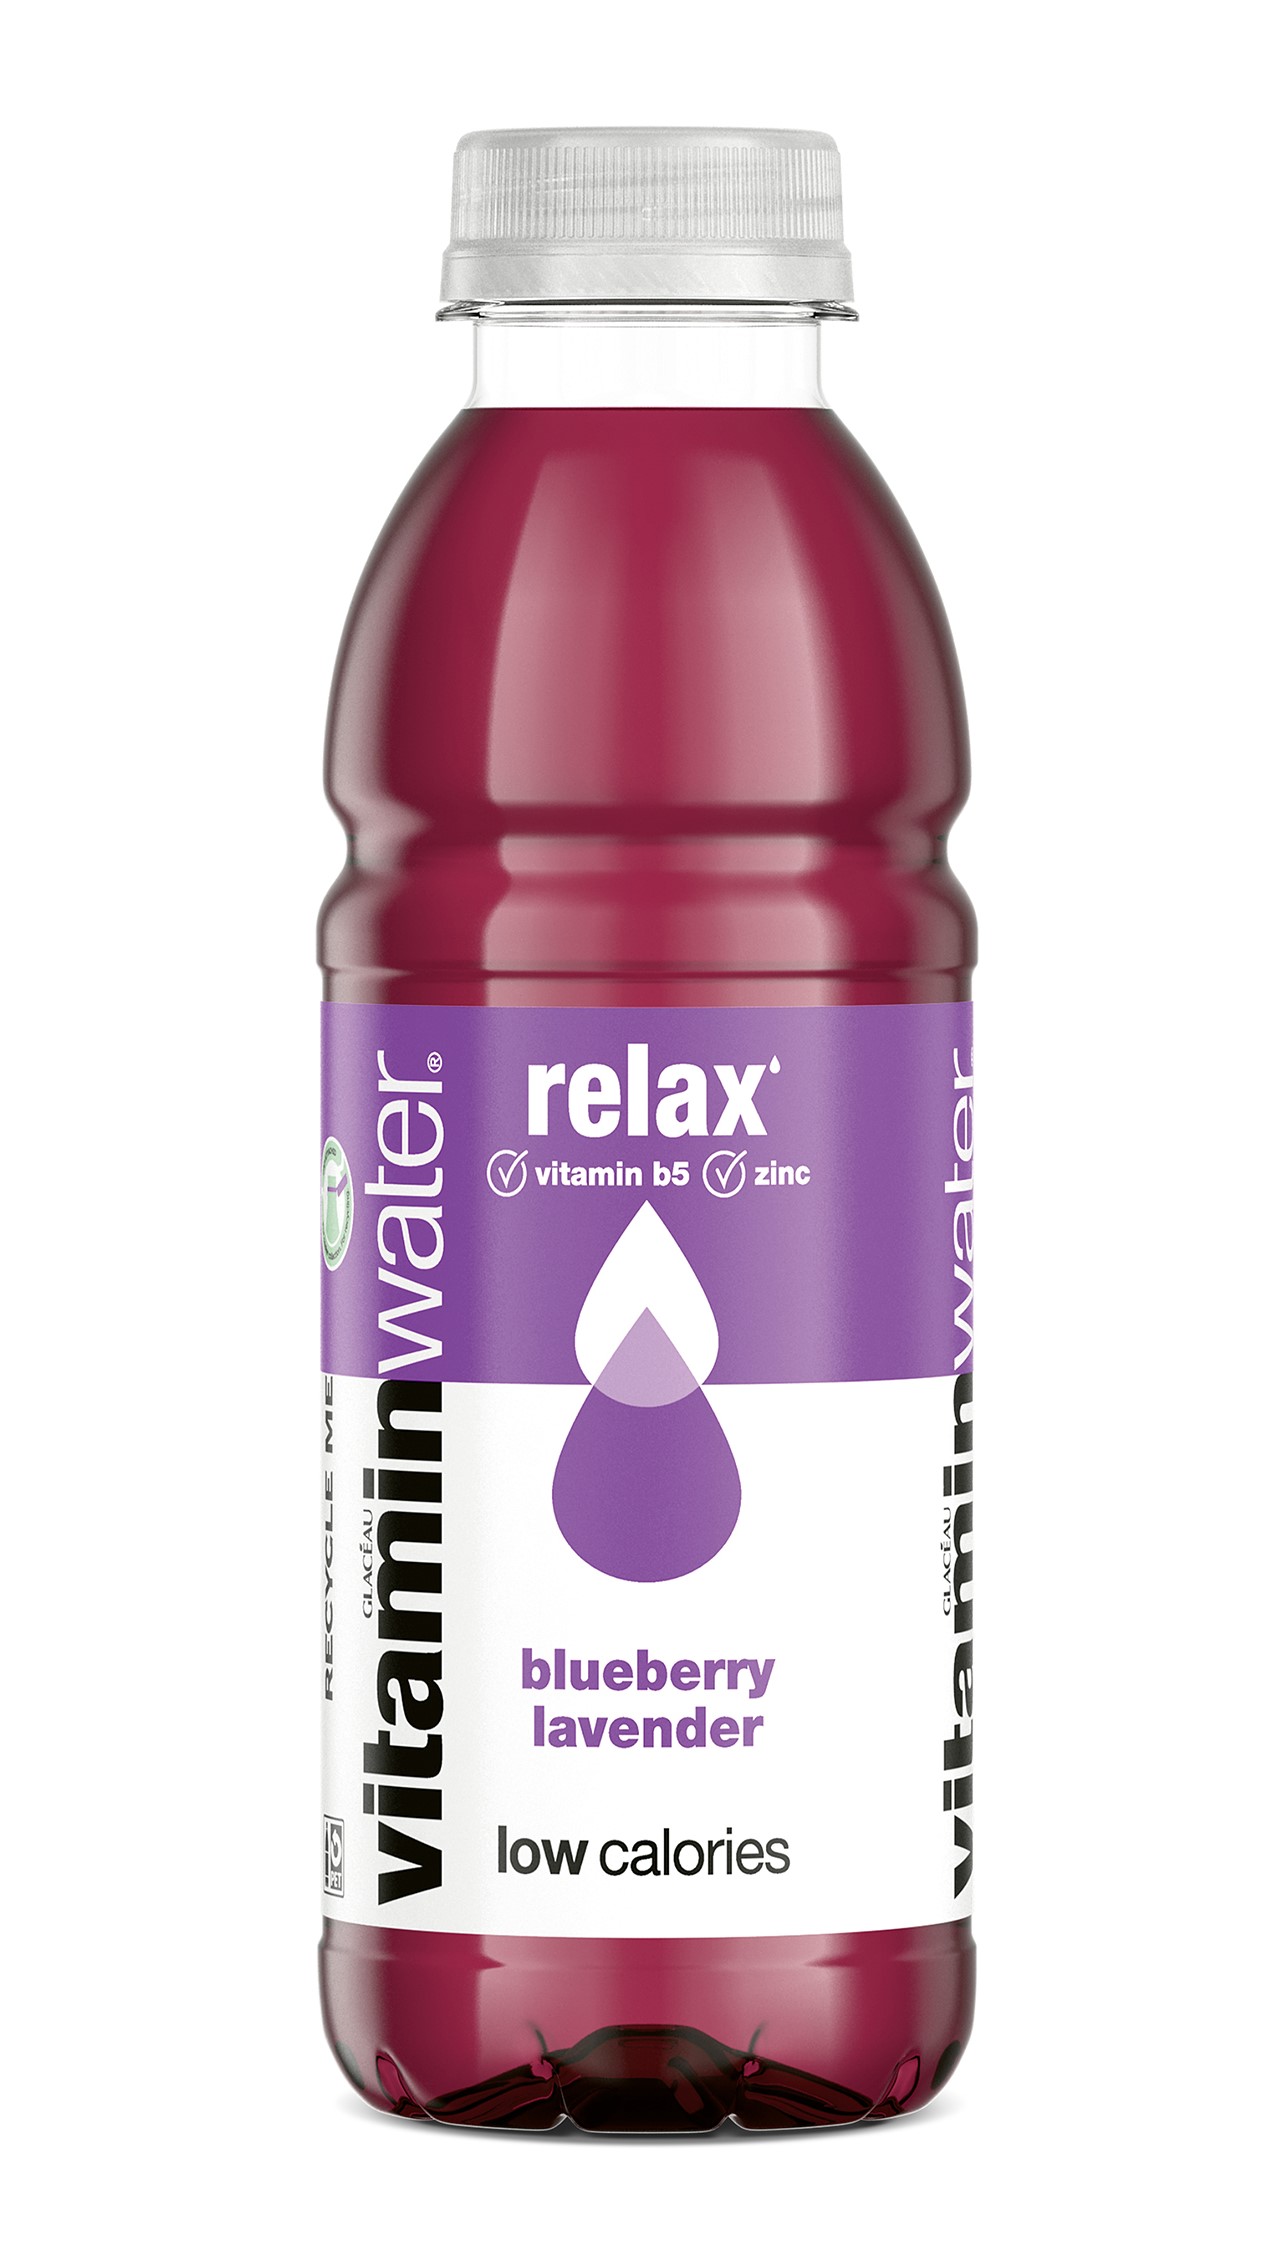 bouteille de vitaminwater relax